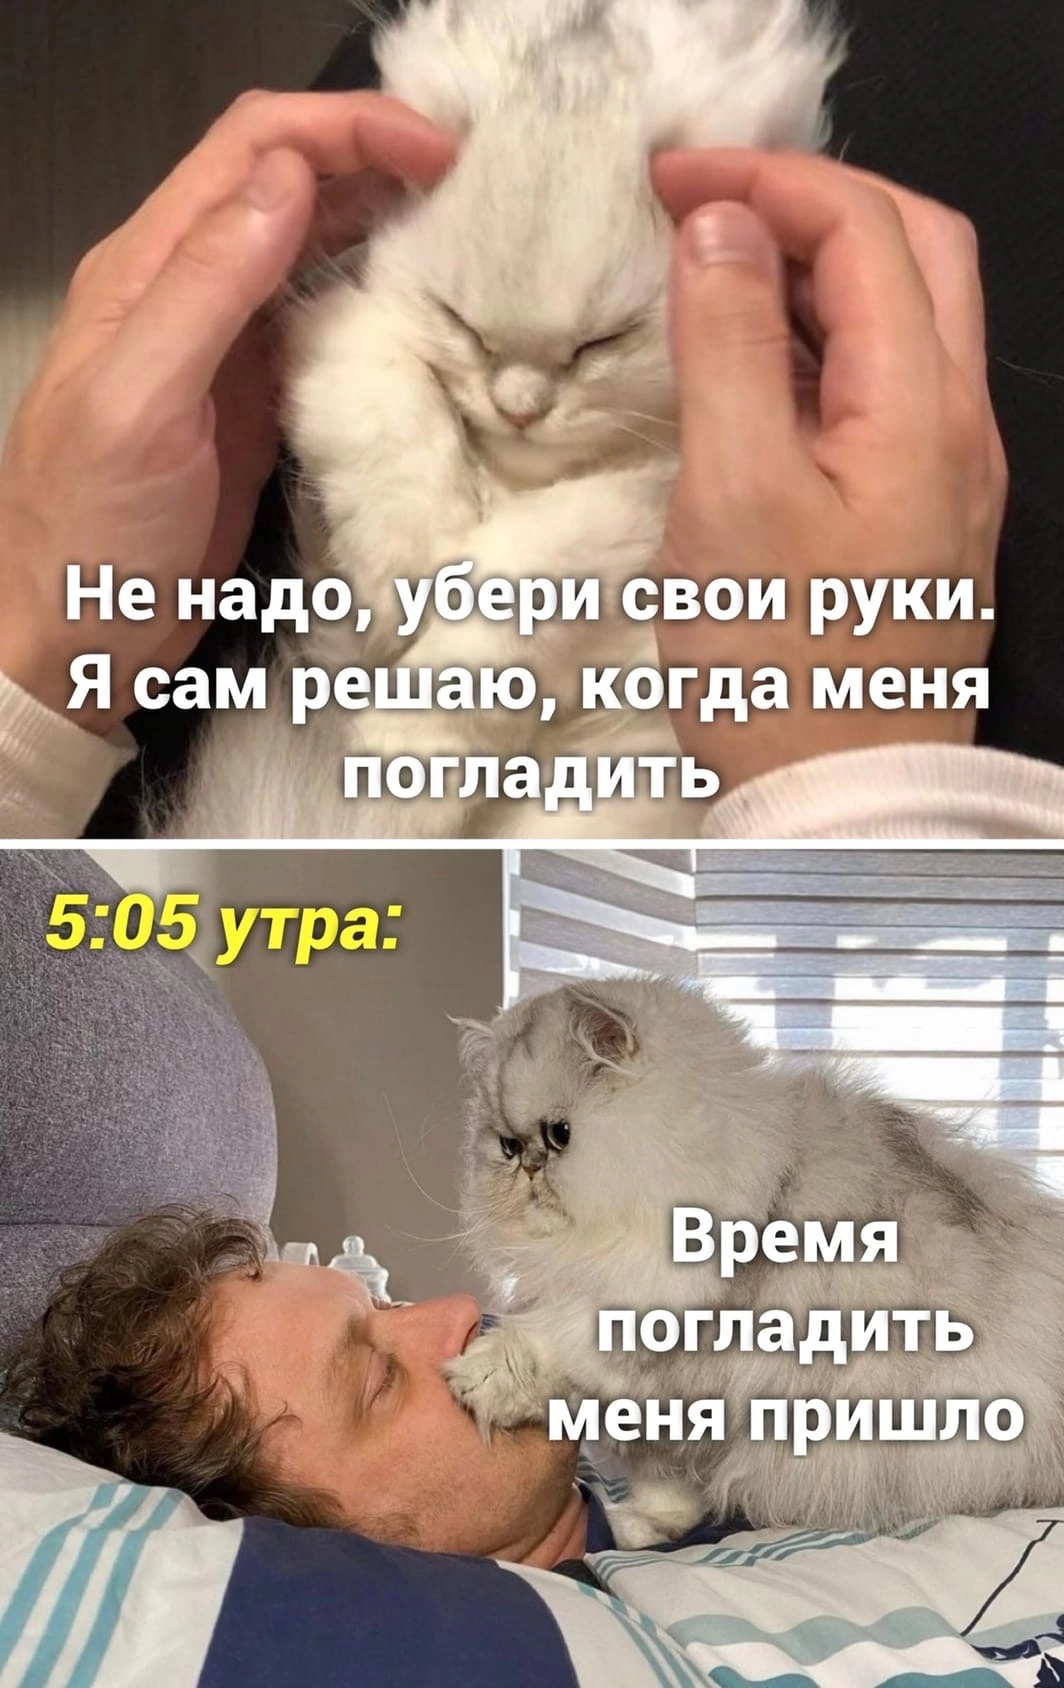 The hour has struck - Humor, Picture with text, cat, Stroking, Morning, The time has come